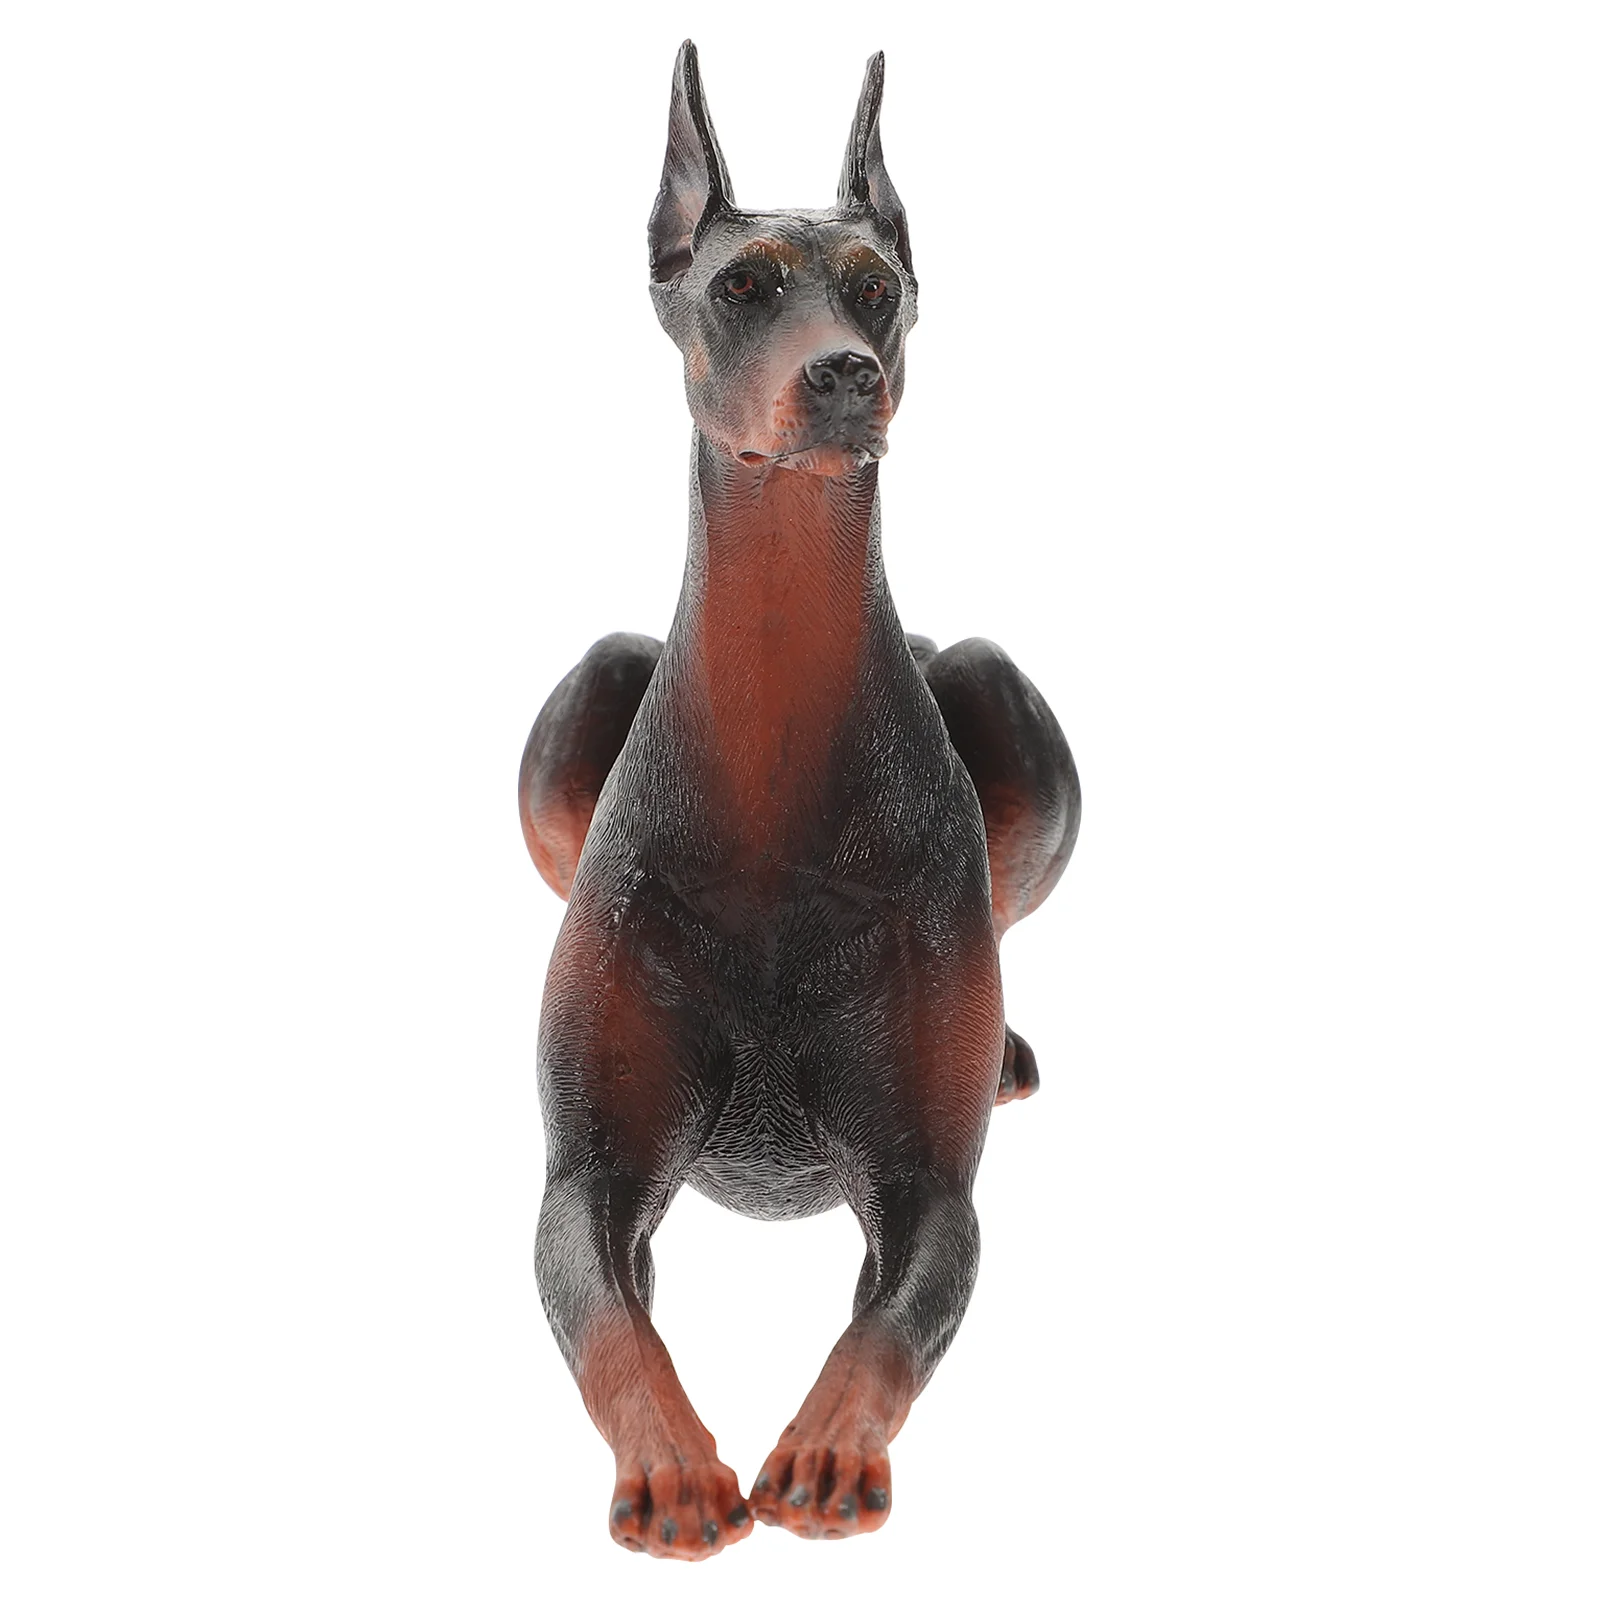 

Dog Doberman Figurine Statue Retriever Educational Accents Sitting Figure Table Toy Puppy Toys Sitter Sculpture Figurines Animal